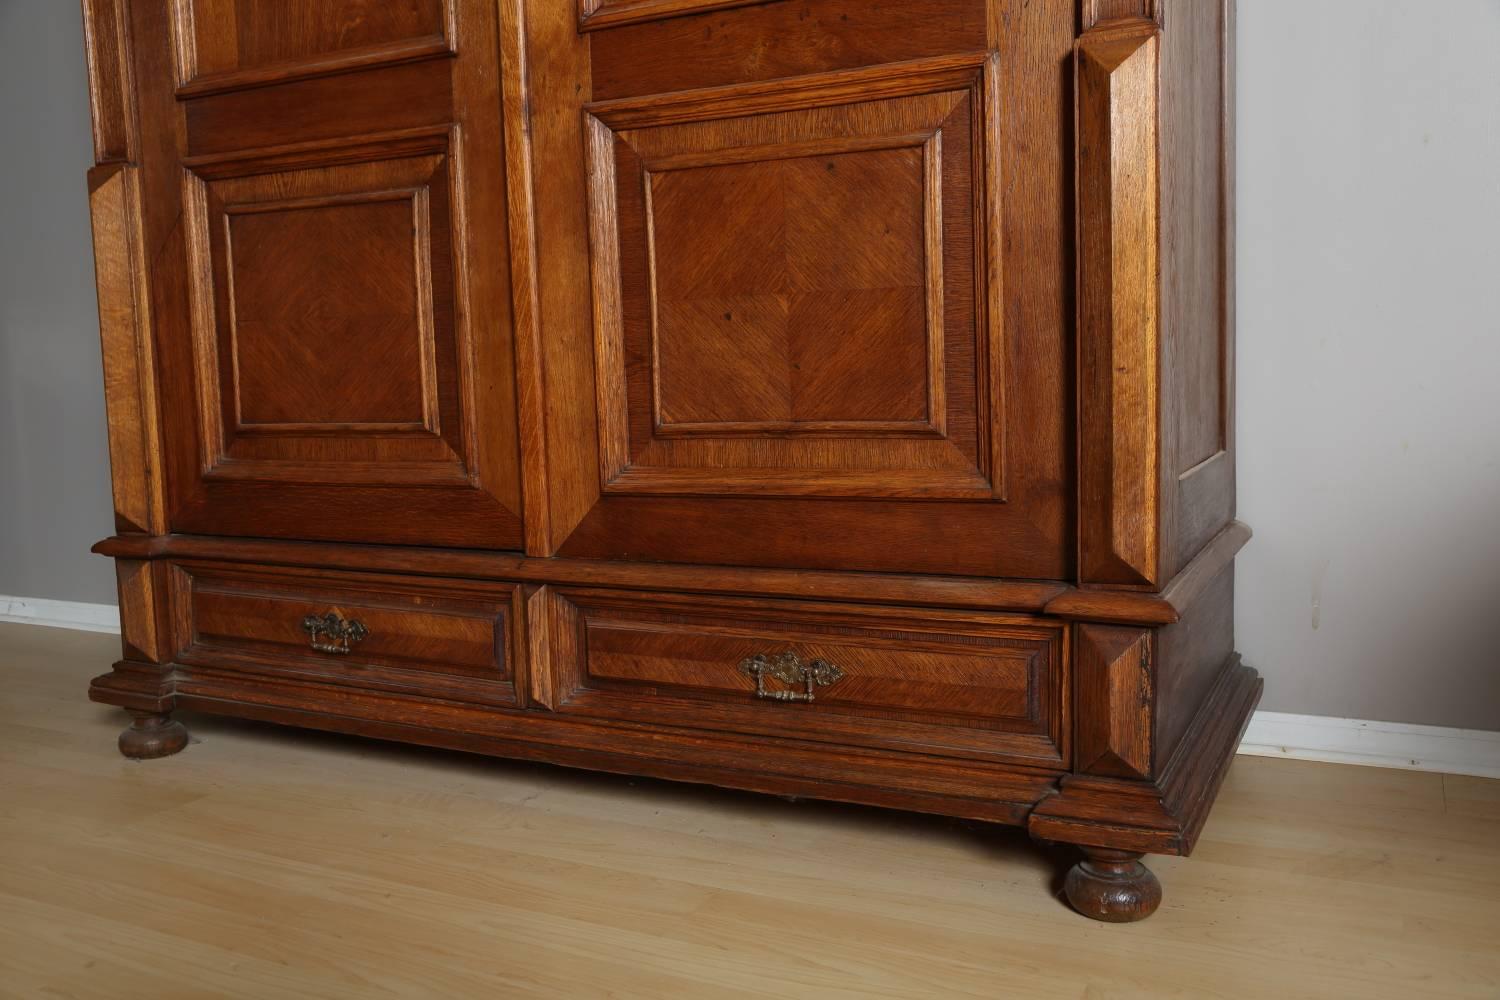 Oak armoire, circa 1880. Oak armoire crafted in Germany, features two doors flanked by carved details, and two drawers at bottom. The piece has been restored and waxed. The armoire comes apart for transportation. Complimentary delivery and set up